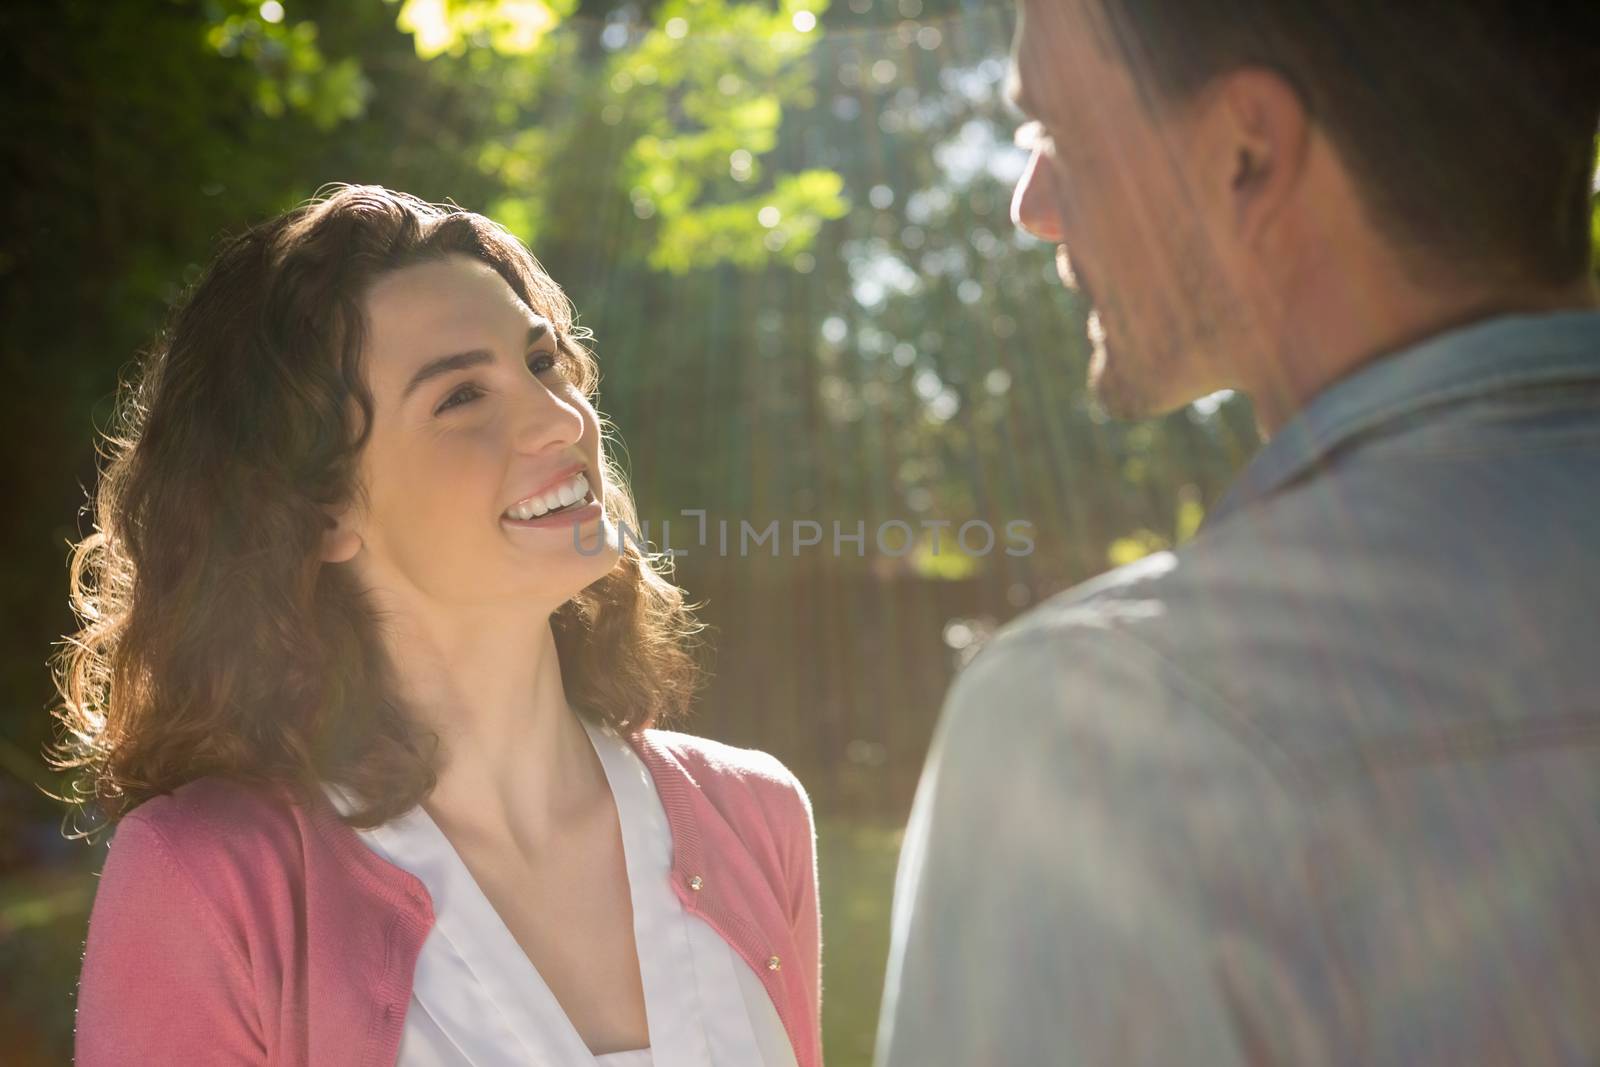 Romantic couple looking face to face in garden on a sunny day